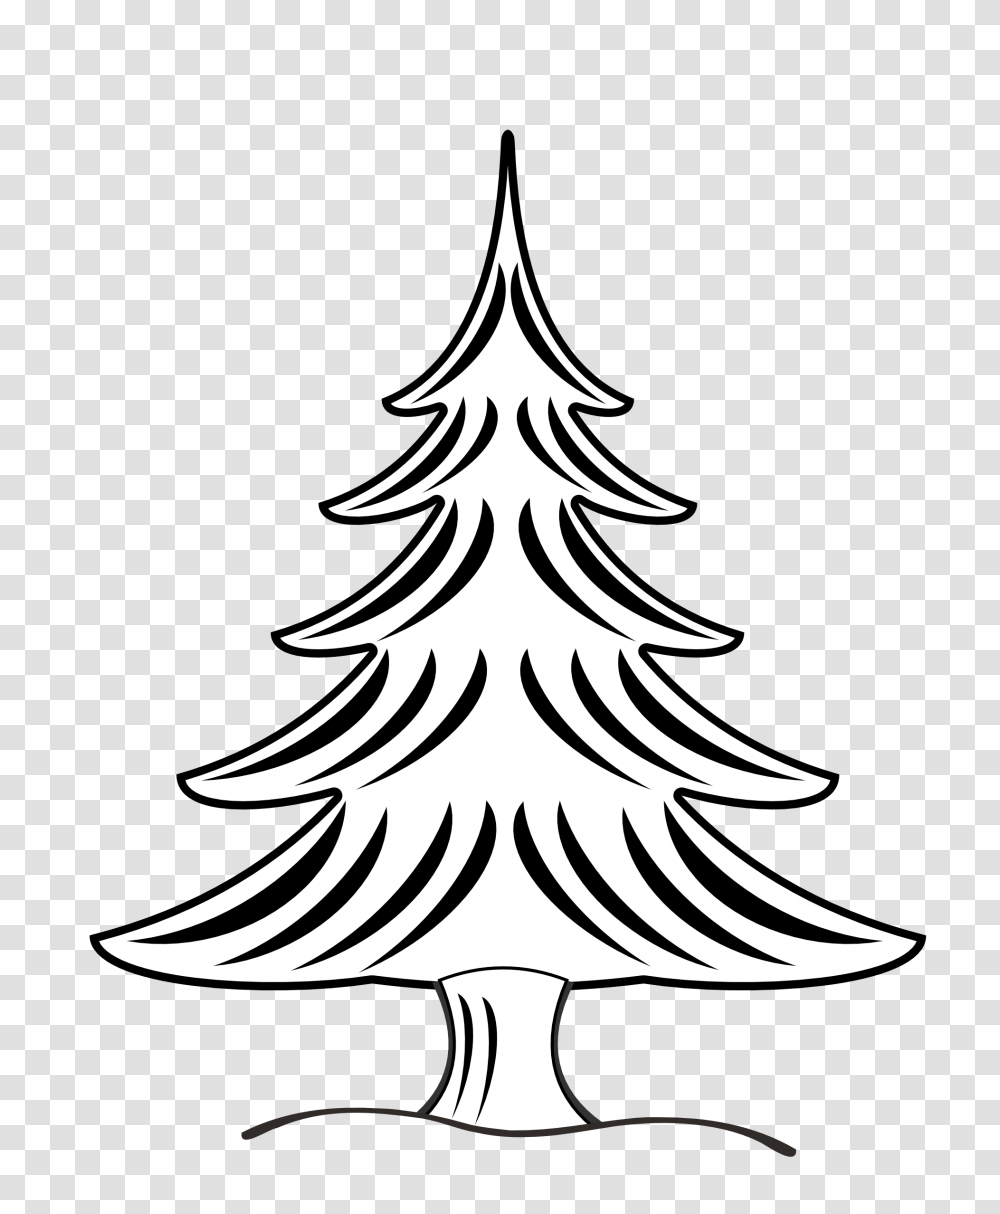 Pine Trees Clipart Black And White Transparent Png